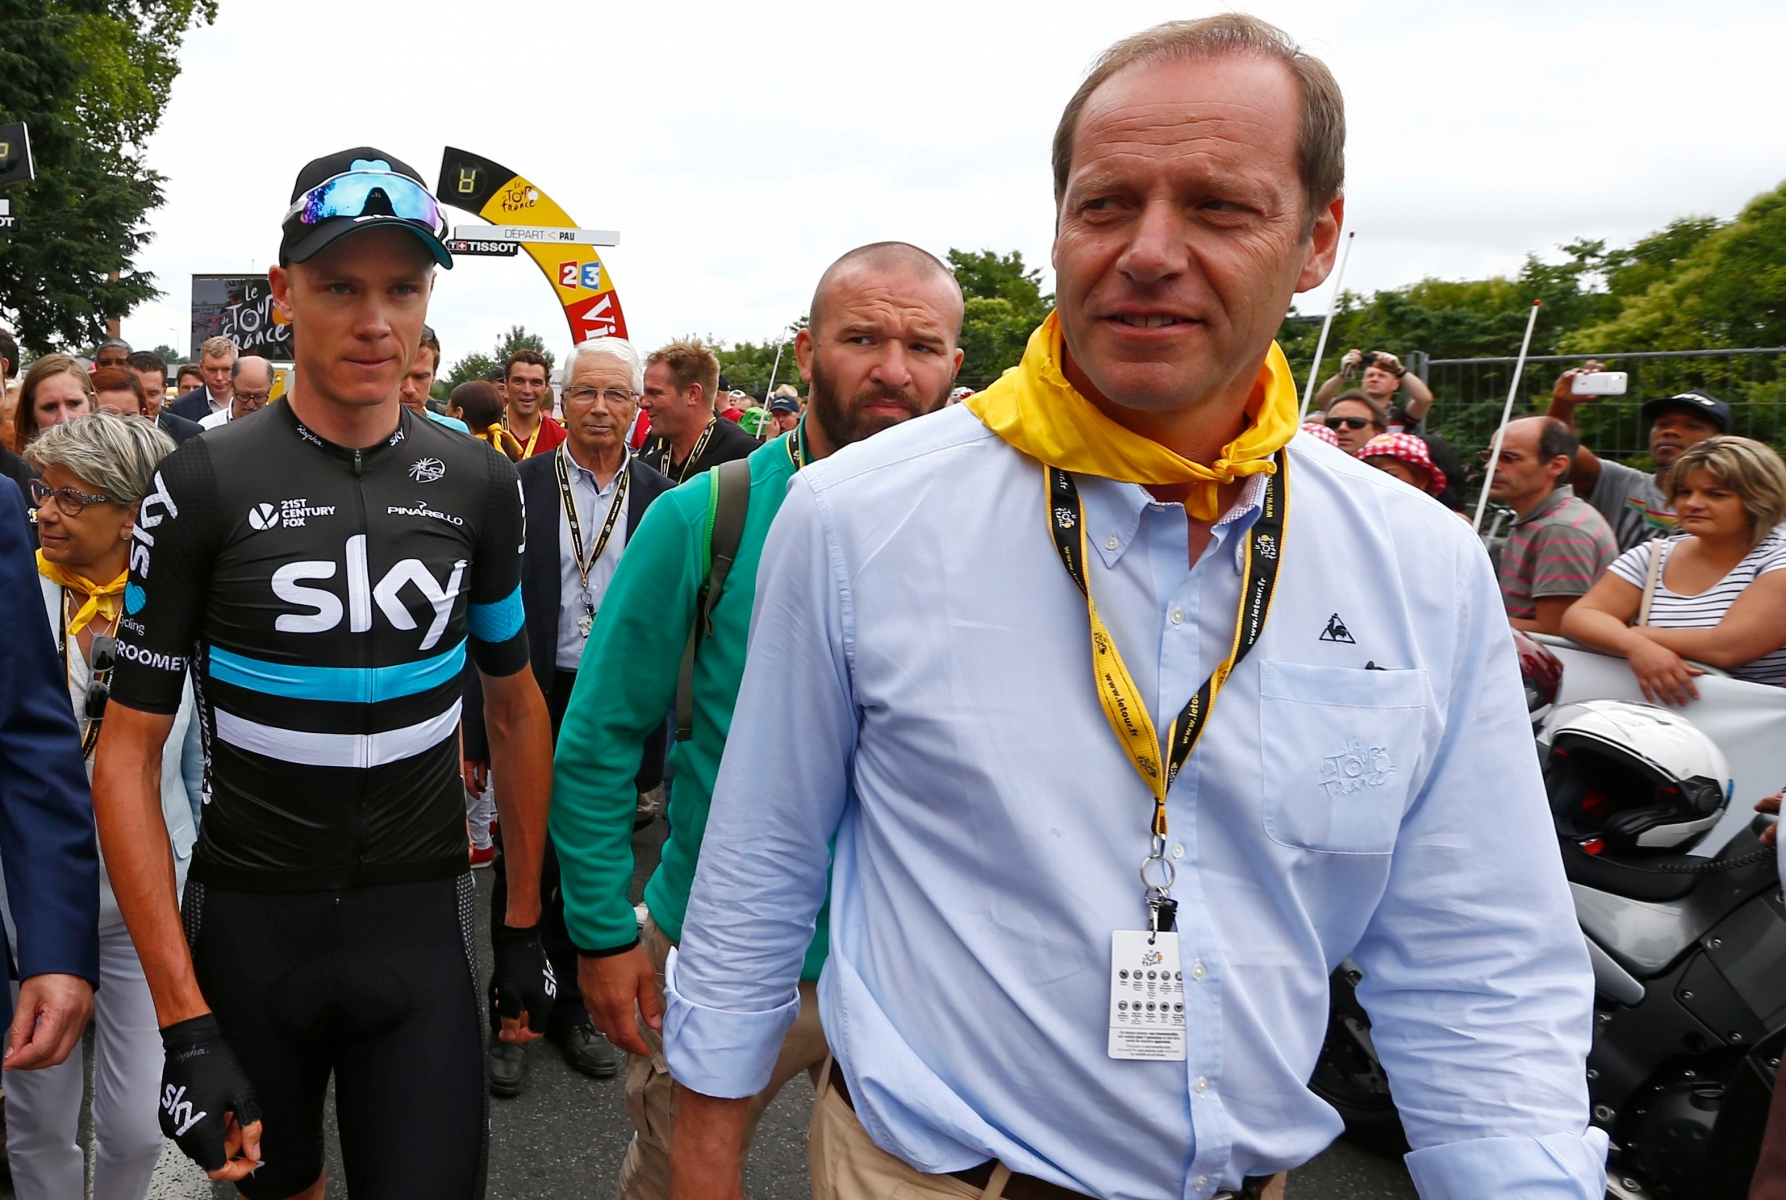 Tour de France director Christian Prudhomme, right, and BritainÌs Chris Froome arrive before the start of the eighth stage of the Tour de France cycling race over 184 kilometers (114.3 miles) with start in Pau and finish in Bagneres-de-Luchon, France, Saturday, July 9, 2016. (AP Photo/Peter Dejong)prudhomme RAD TOUR DE FRANCE 2016